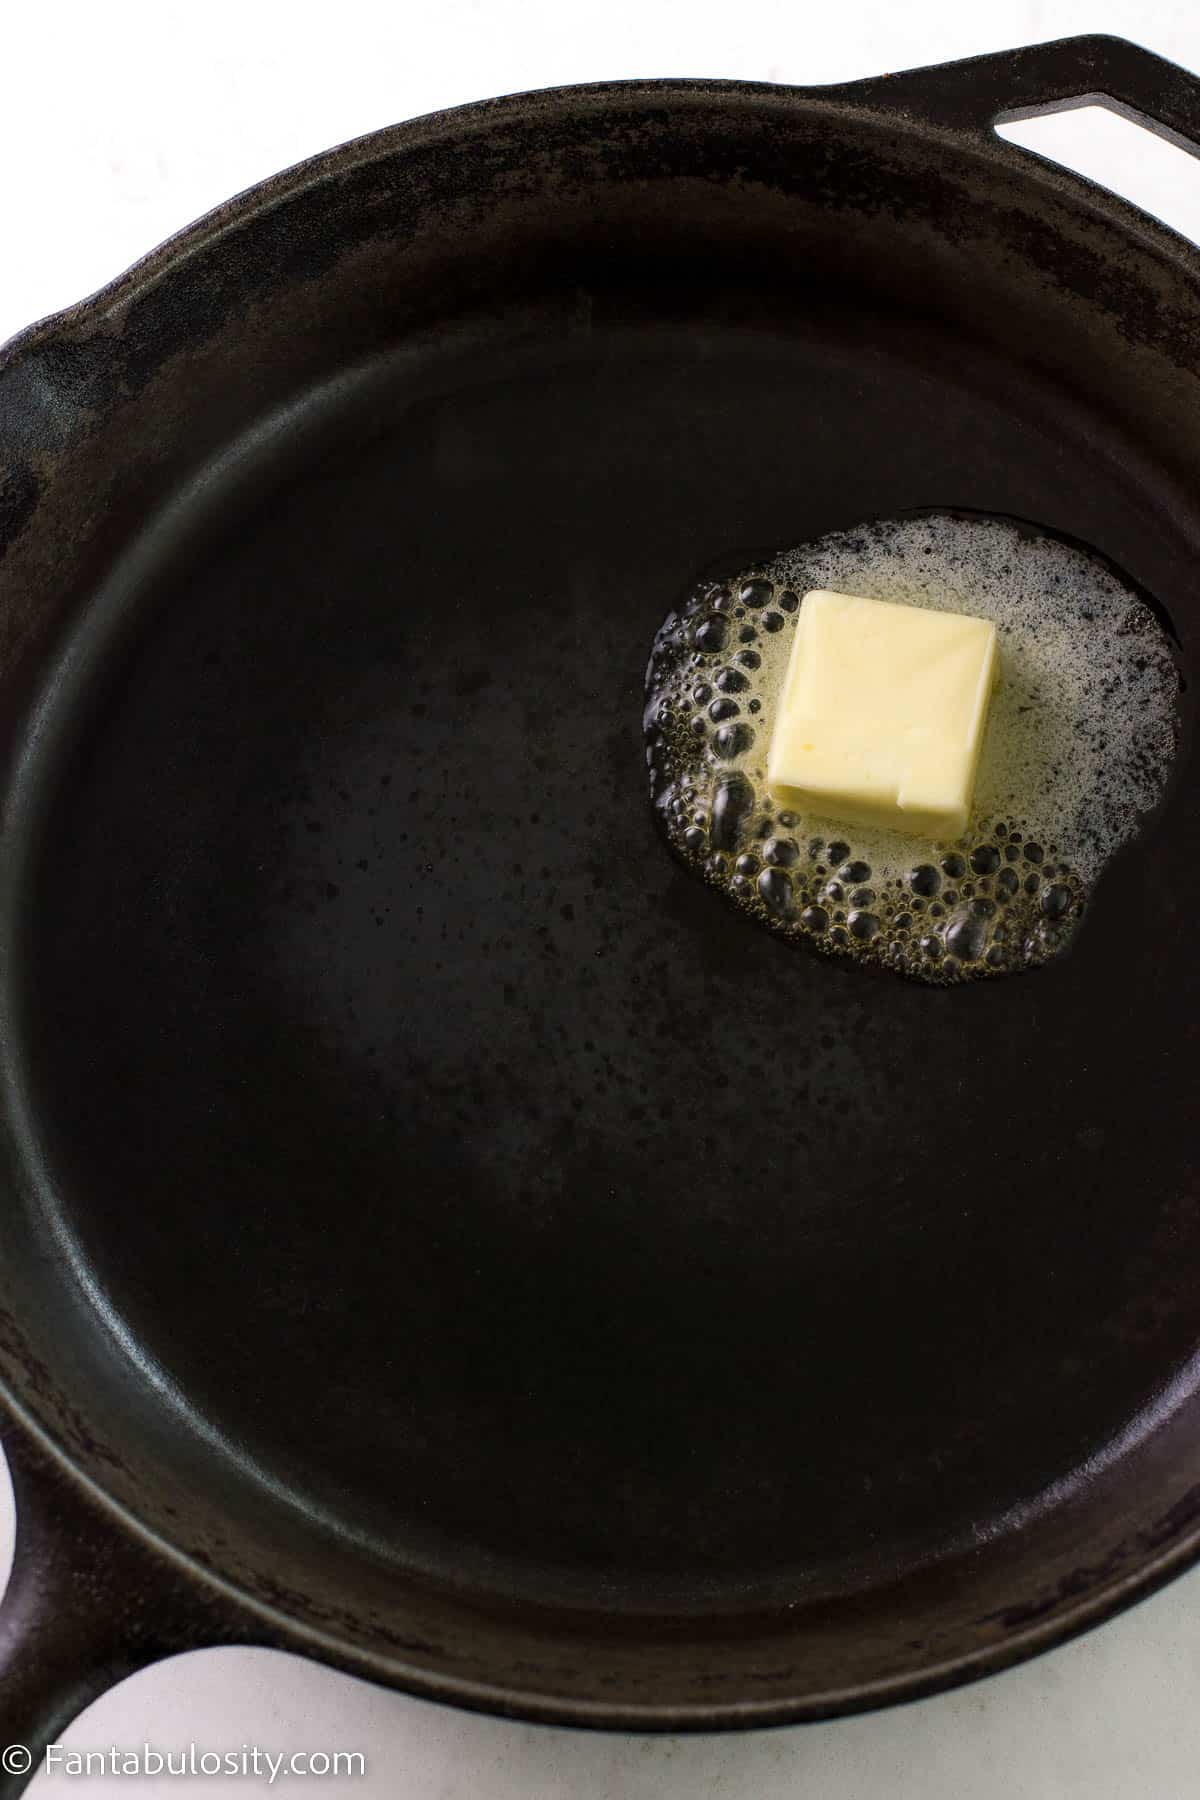 Butter melting in cast iron pan.